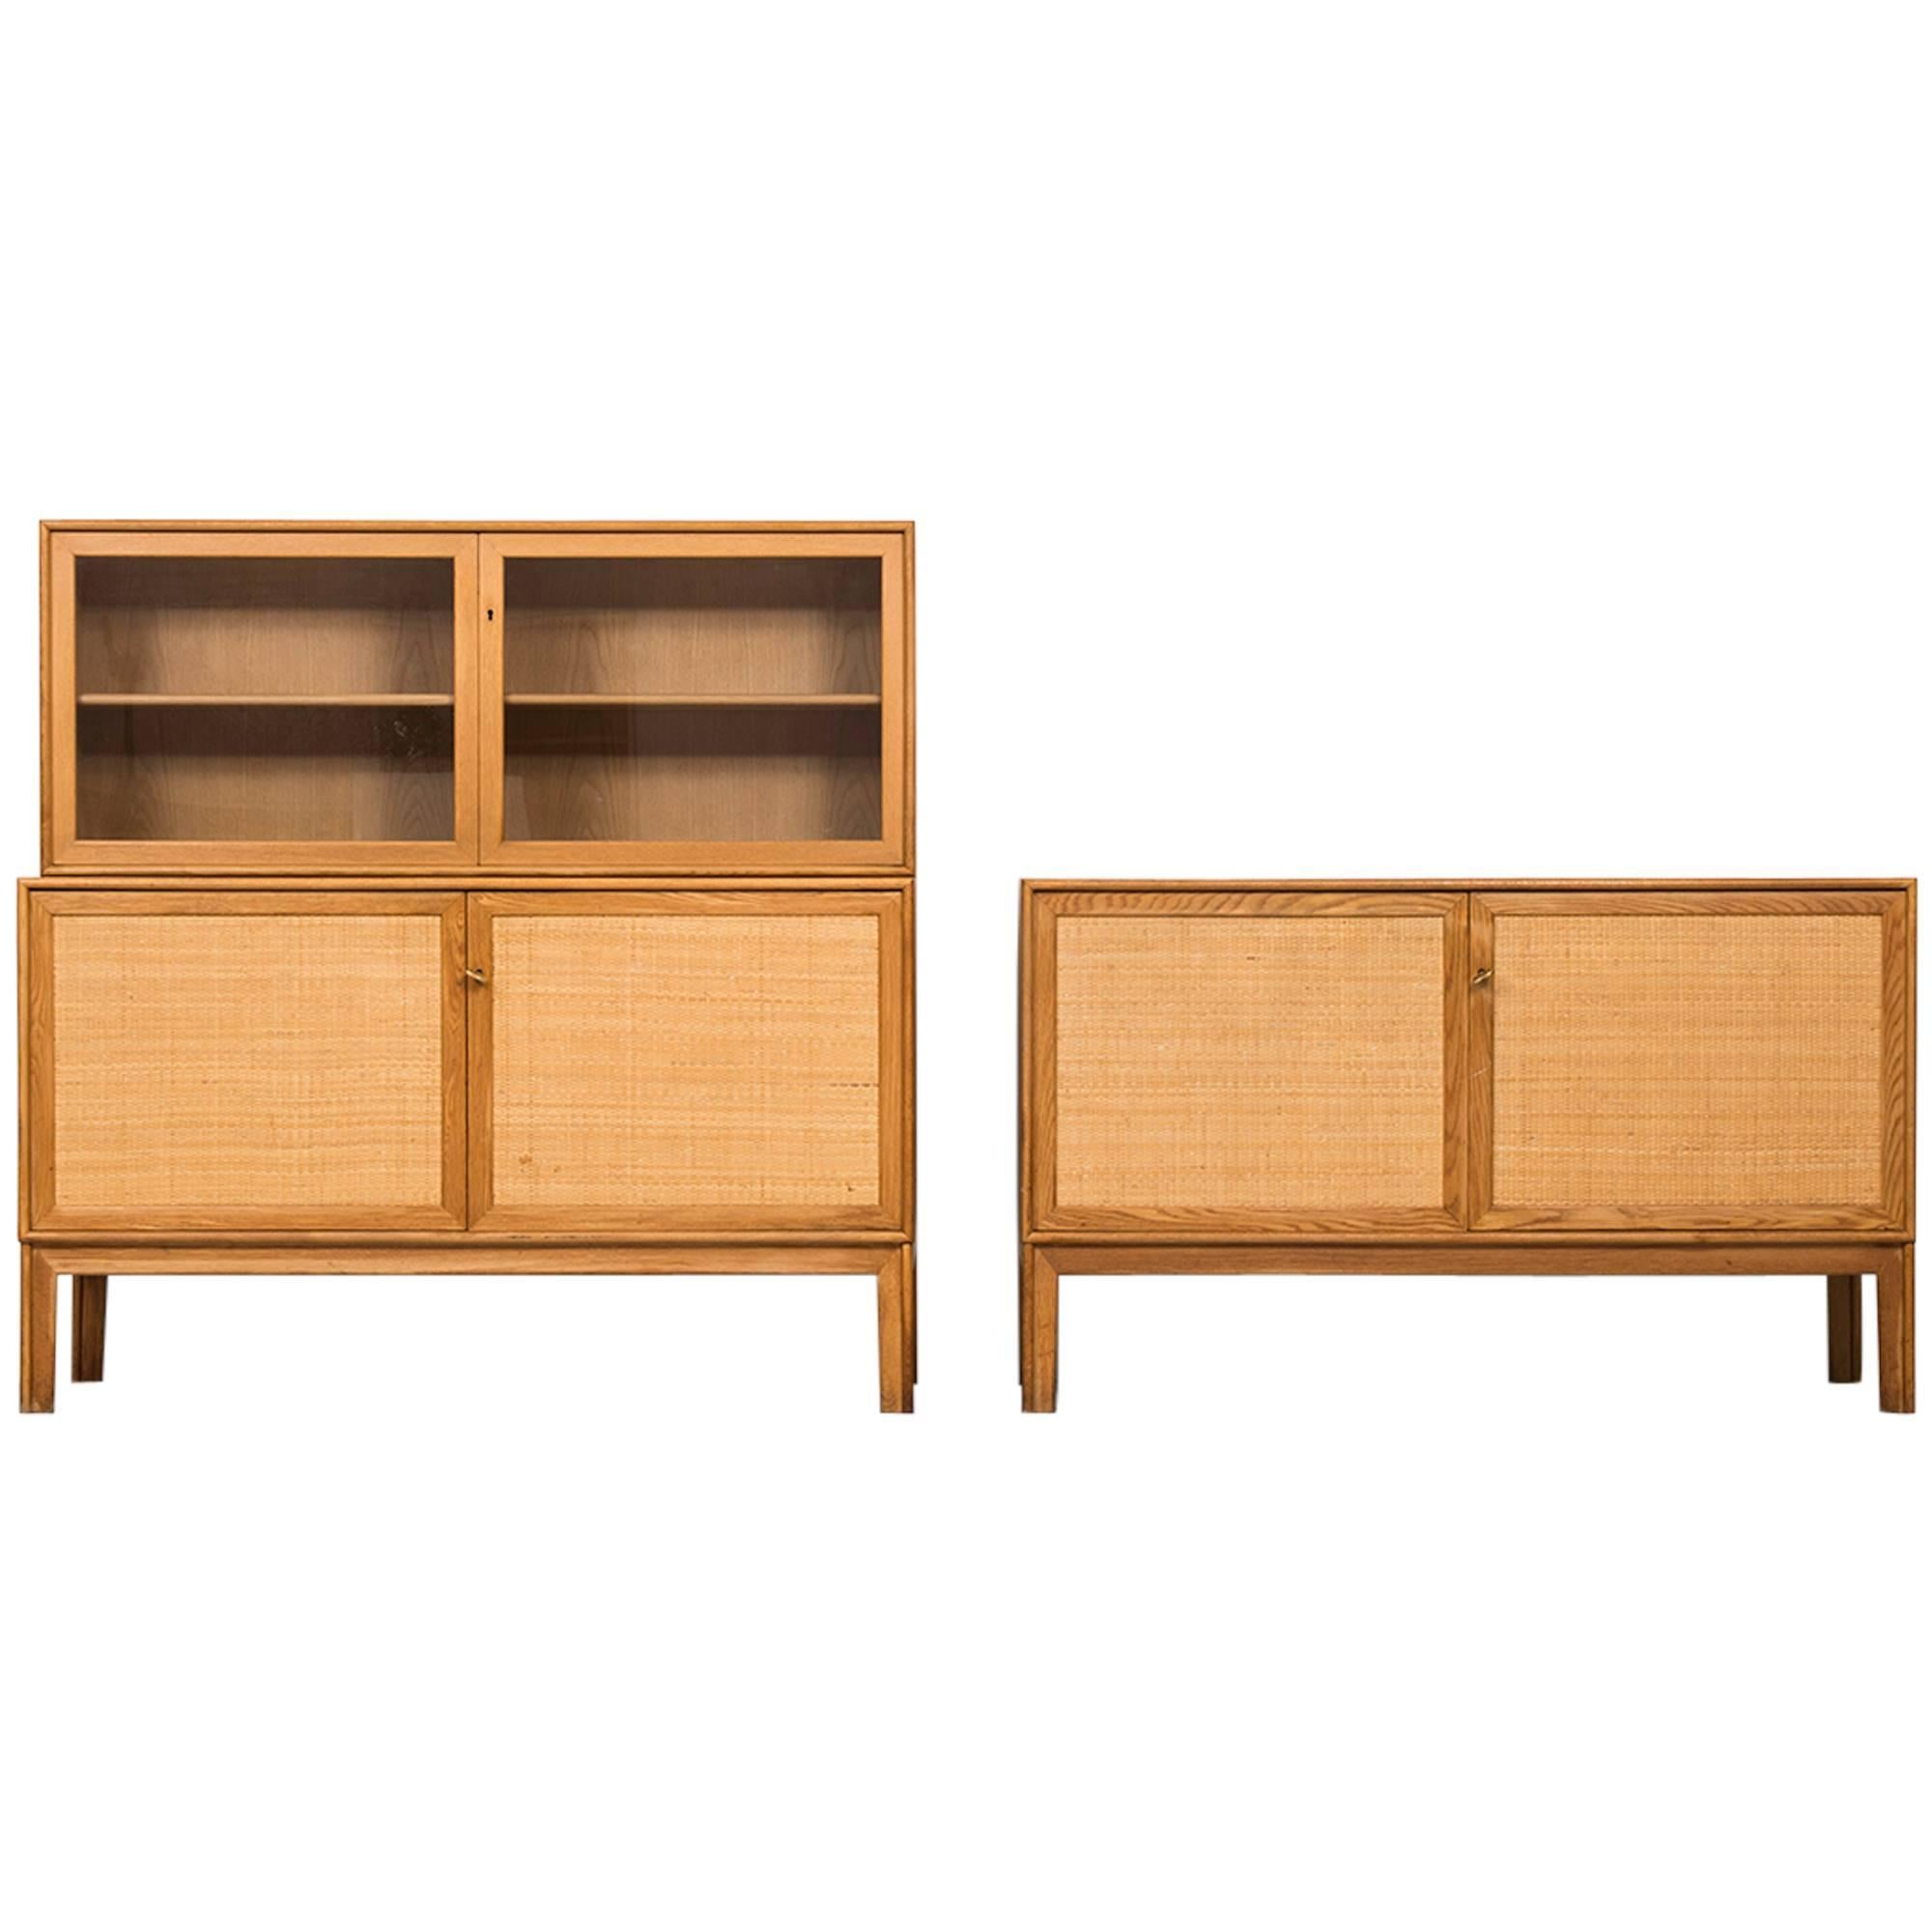 Alf Svensson Sideboards with Glass Cabinet by BjäSta in Sweden